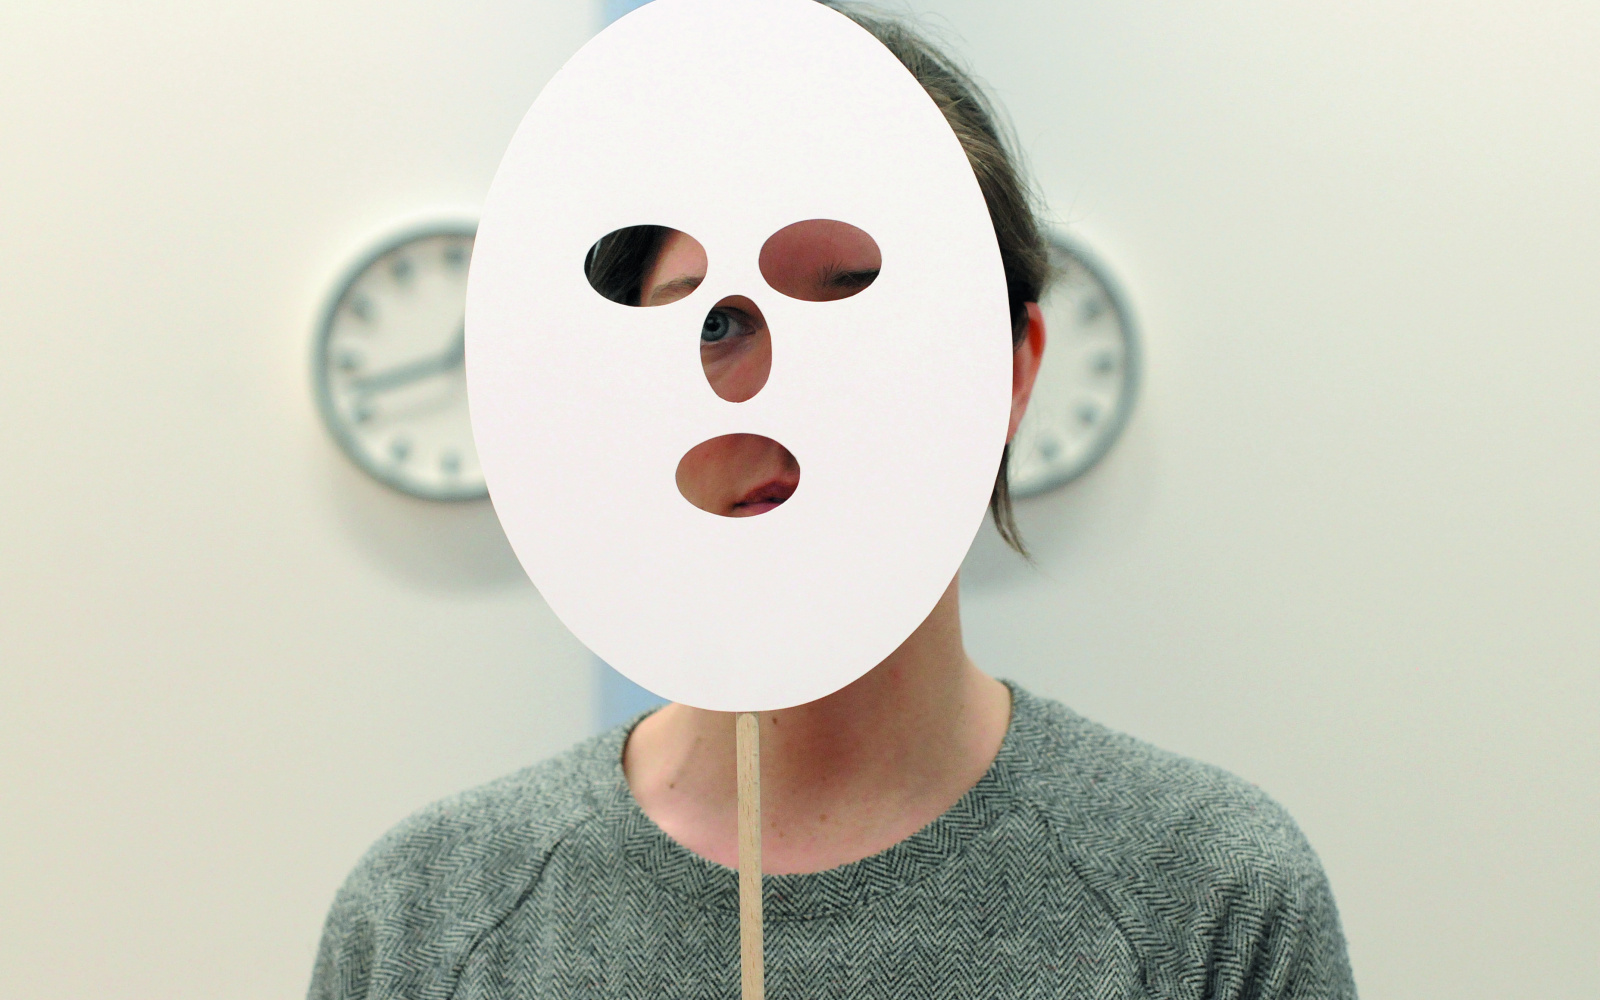 A person of undefined gender holding a white paper mask in fron of her face.